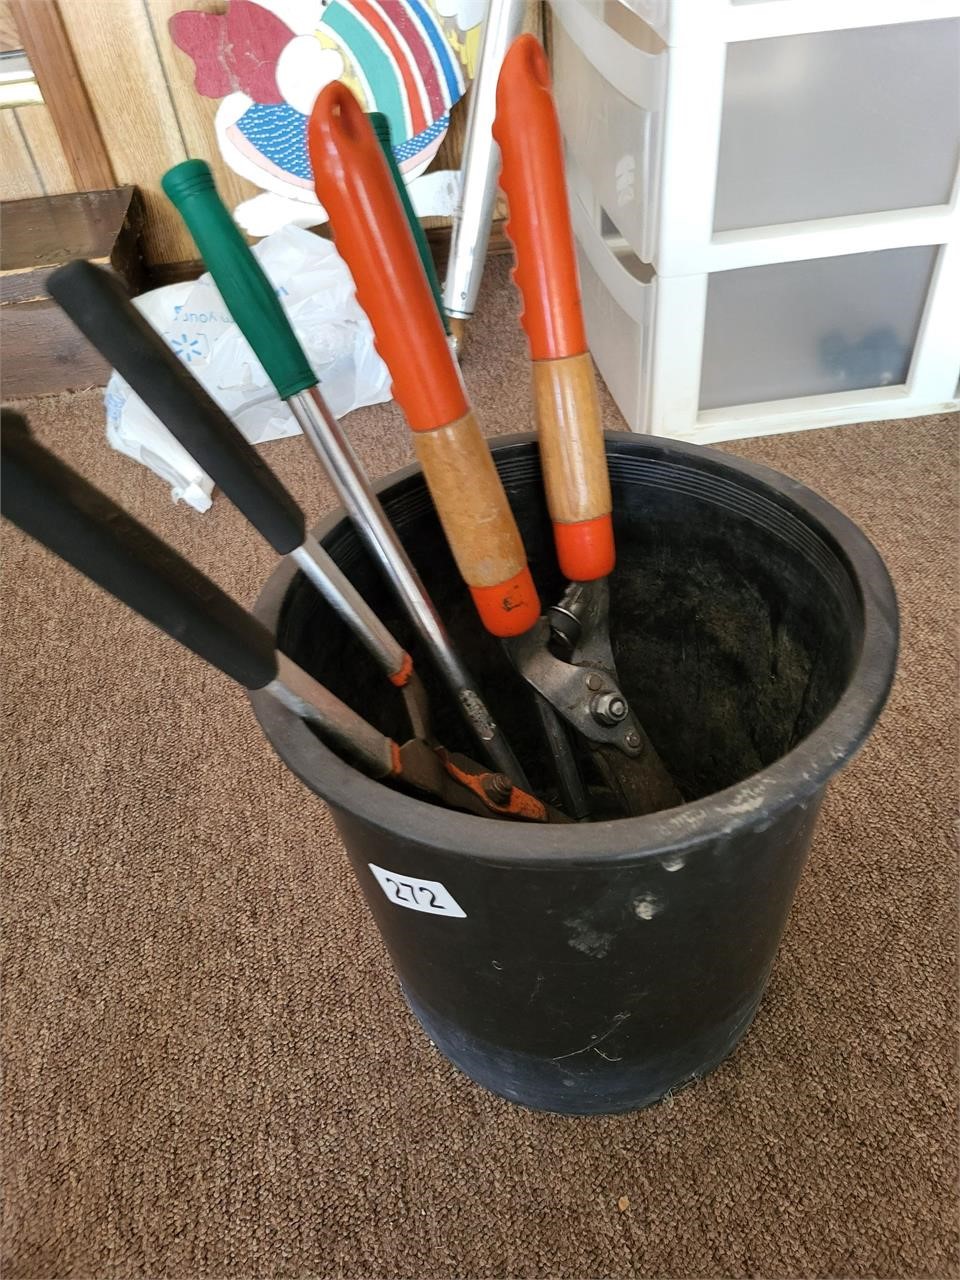 Bucket with Gardening Clippers